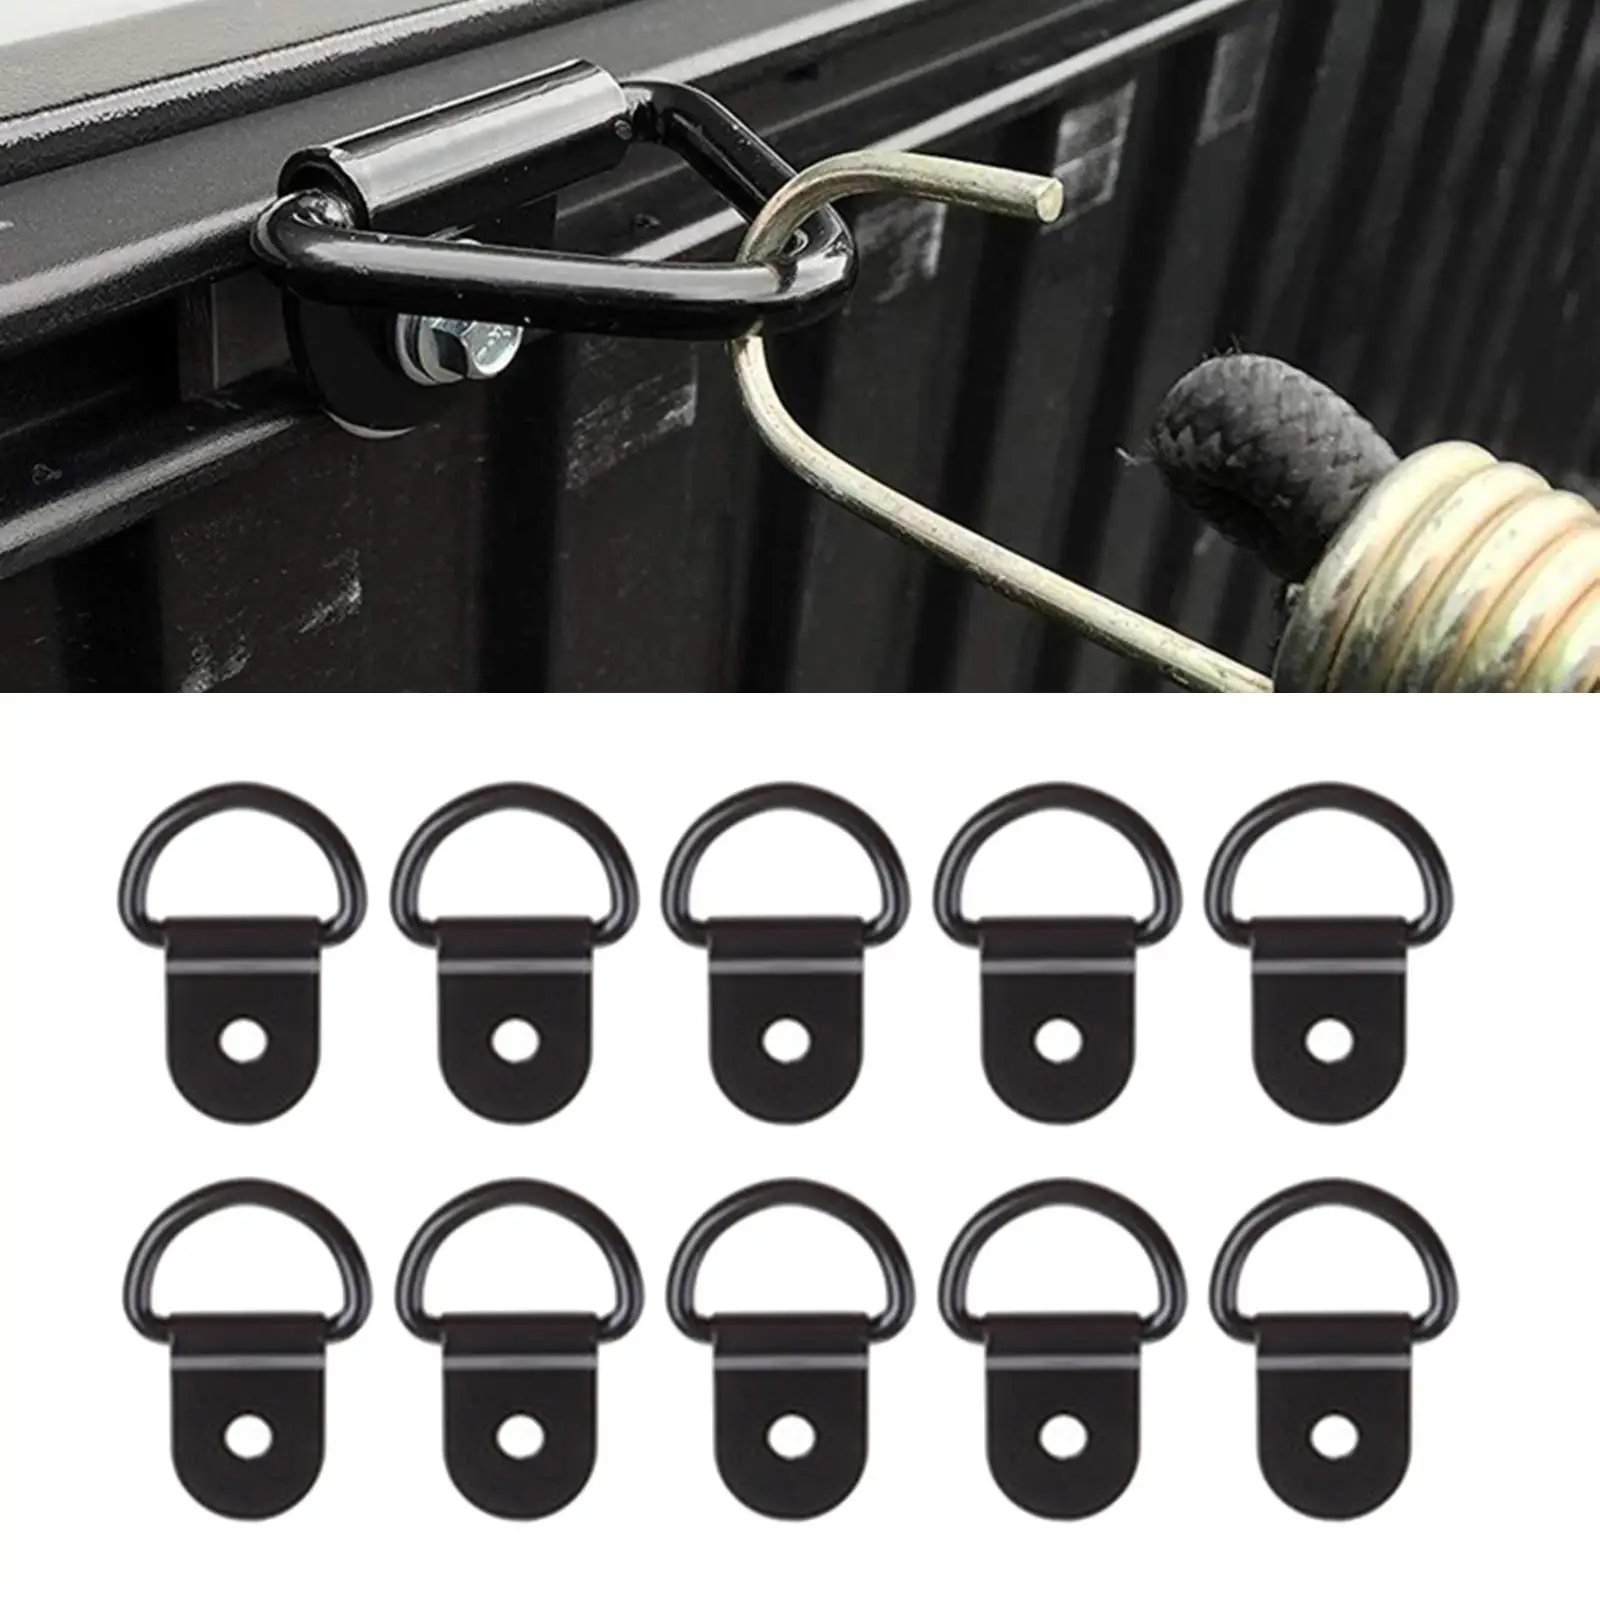 10 Pieces D Ring Tie Down Anchors Lashing Ring Fit for Car RV Cargo SUV Loads On Case